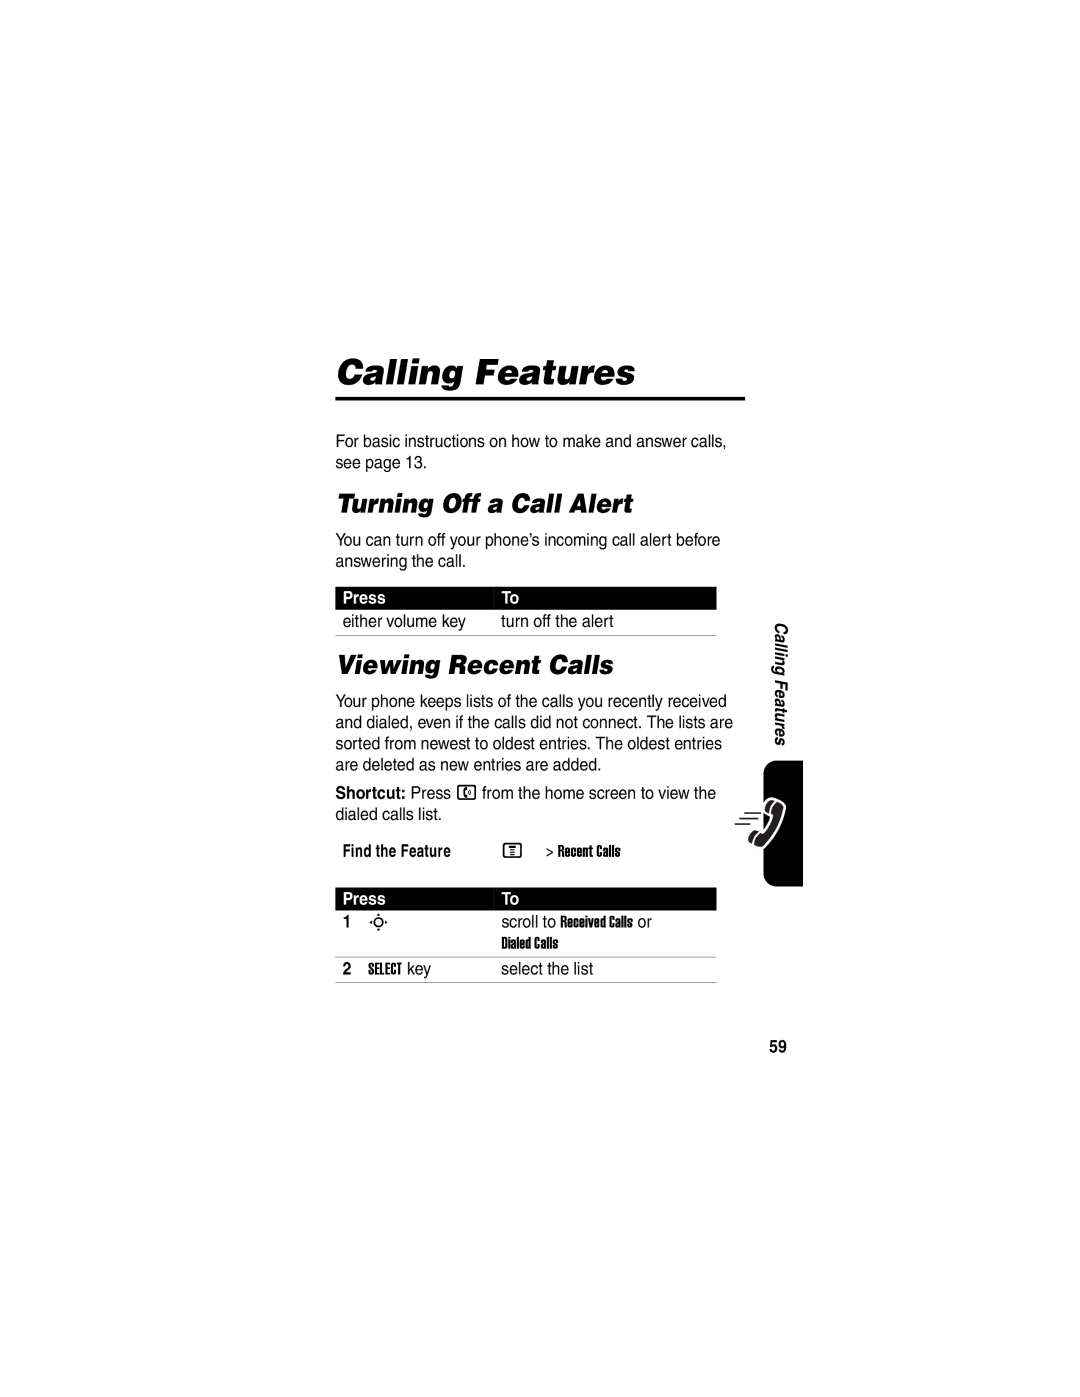 Motorola V330 Calling Features, Turning Off a Call Alert, Viewing Recent Calls, Press Either volume key Turn off the alert 